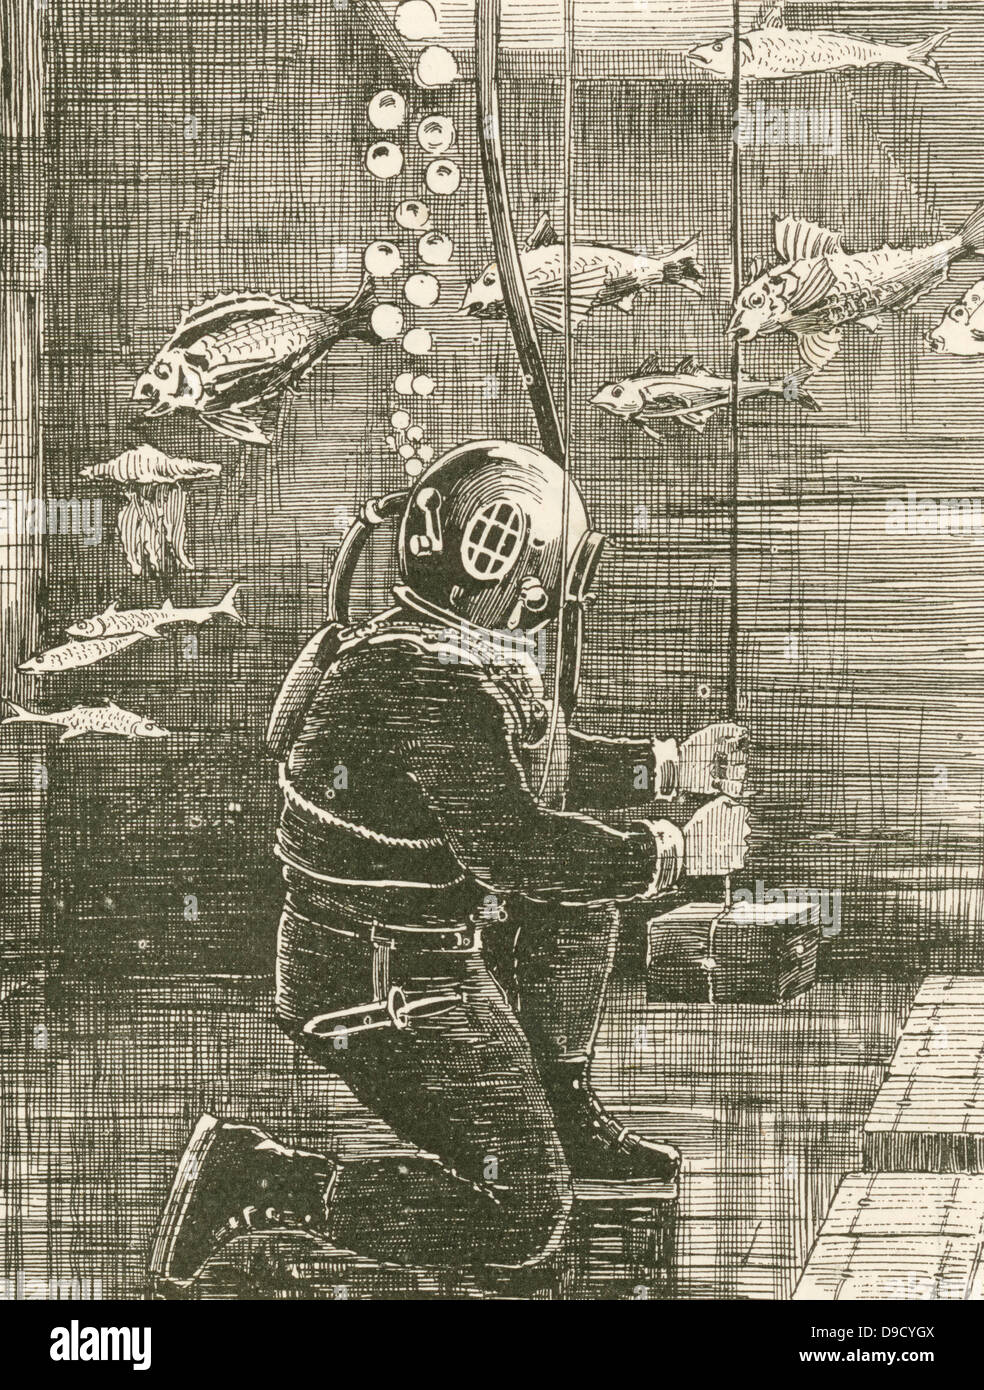 Alexander Lambert (c1837-1892) lead diver for Siebe and Gorman, recovering gold from thre wreck of the Spanish mail steamer Alfonso XII which sank off Grand Canary. Engraving, 1895. Stock Photo